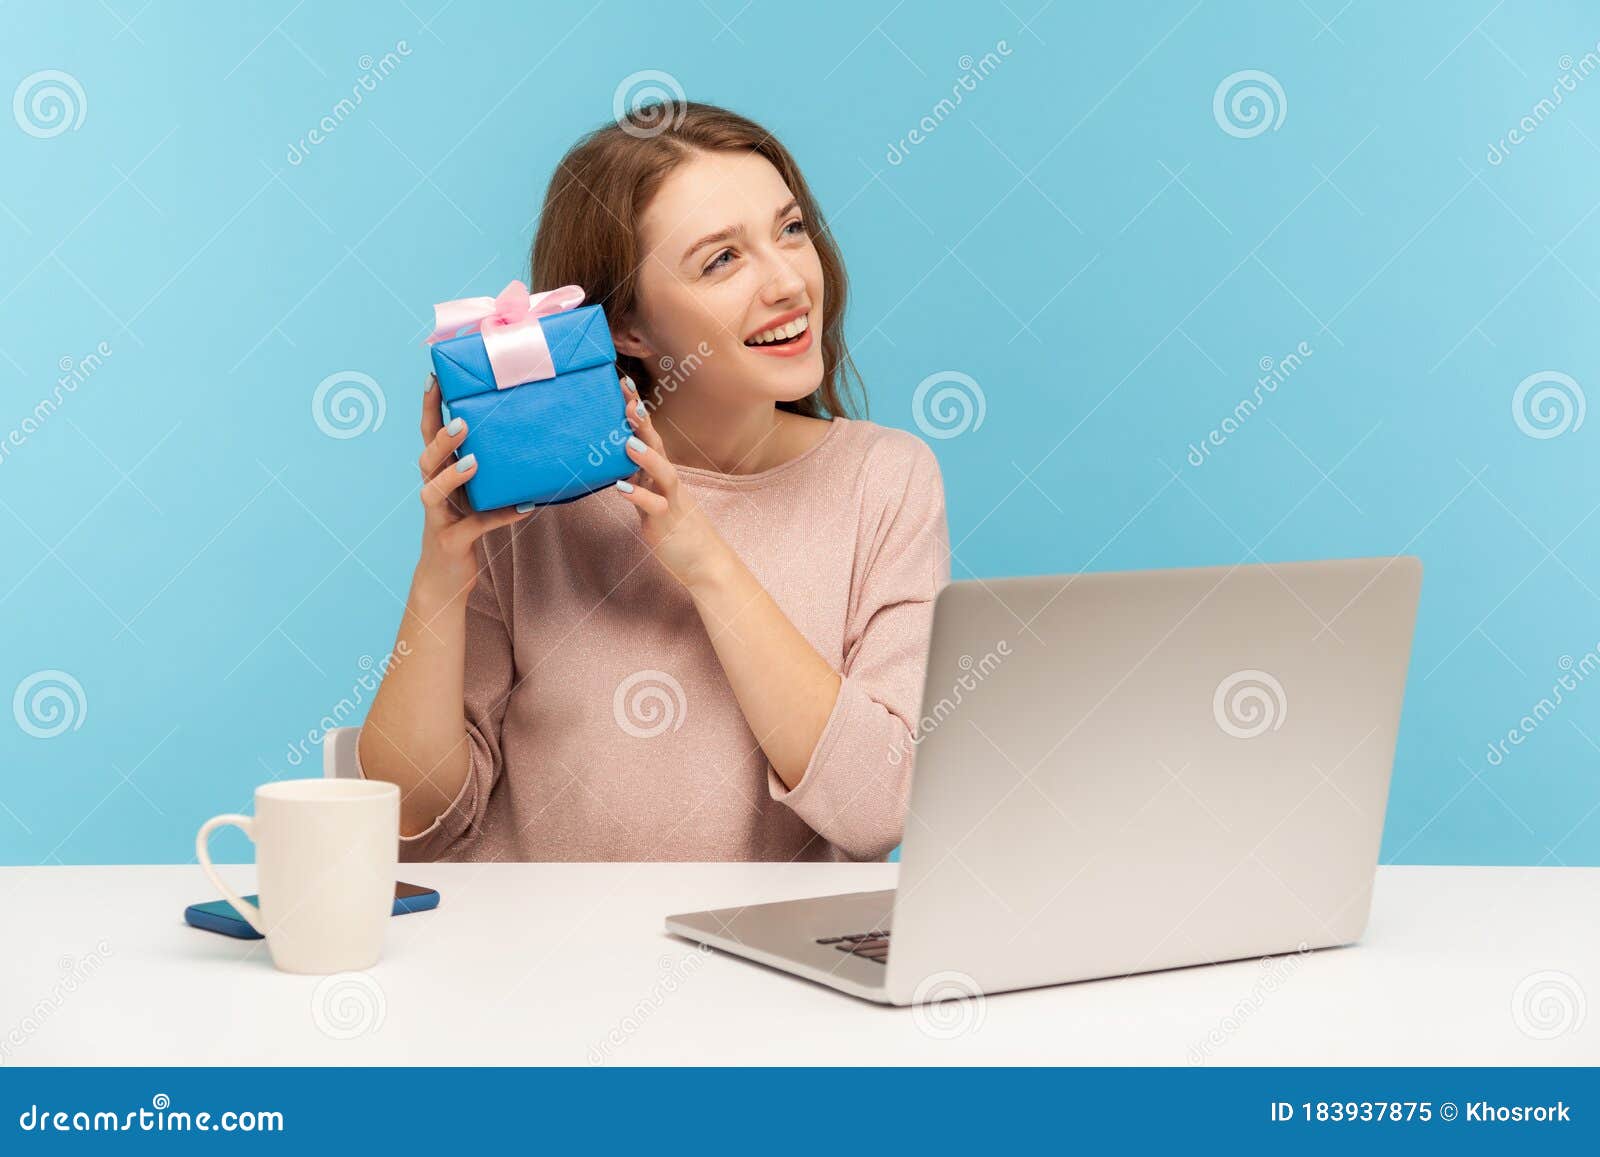 pretty woman employee sitting at workplace and holding gift near ear, listening with interest what`s inside box